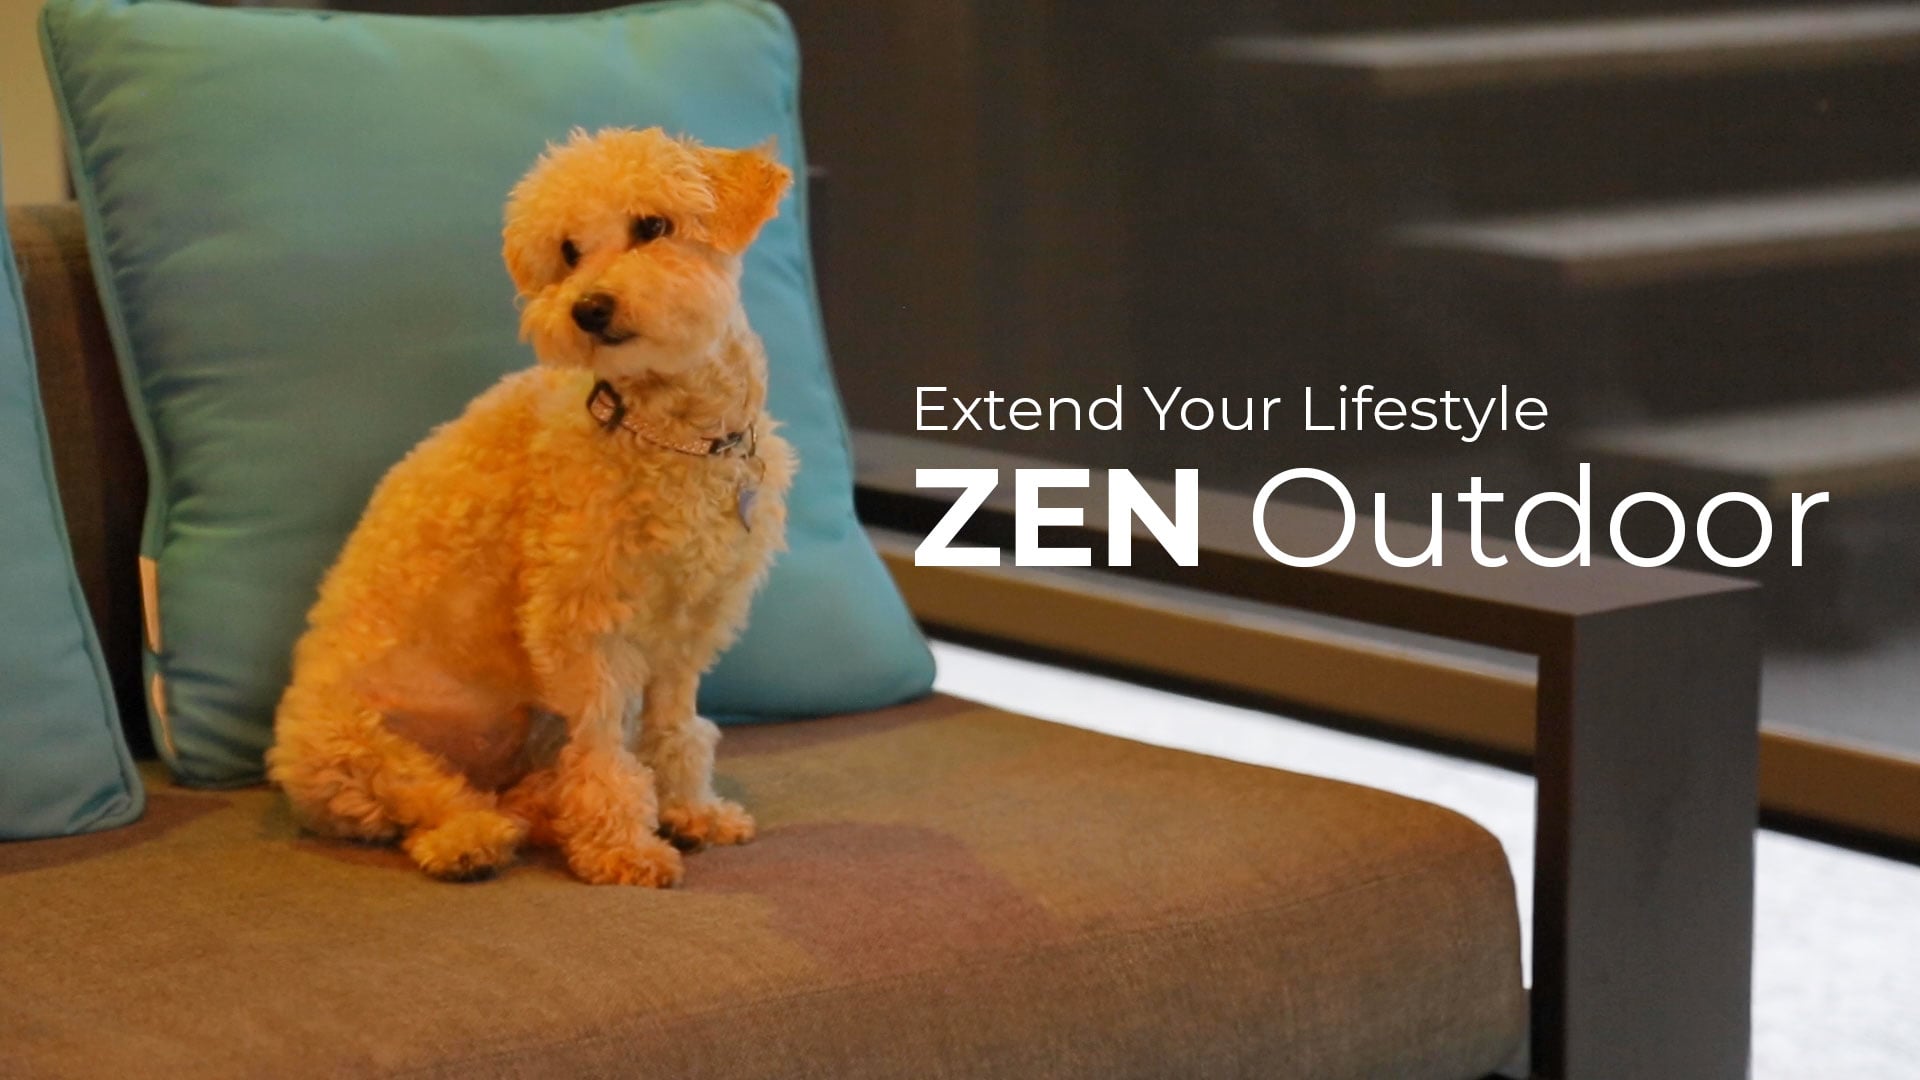 Zen Outdoor Shades – Extend Your Lifestyle